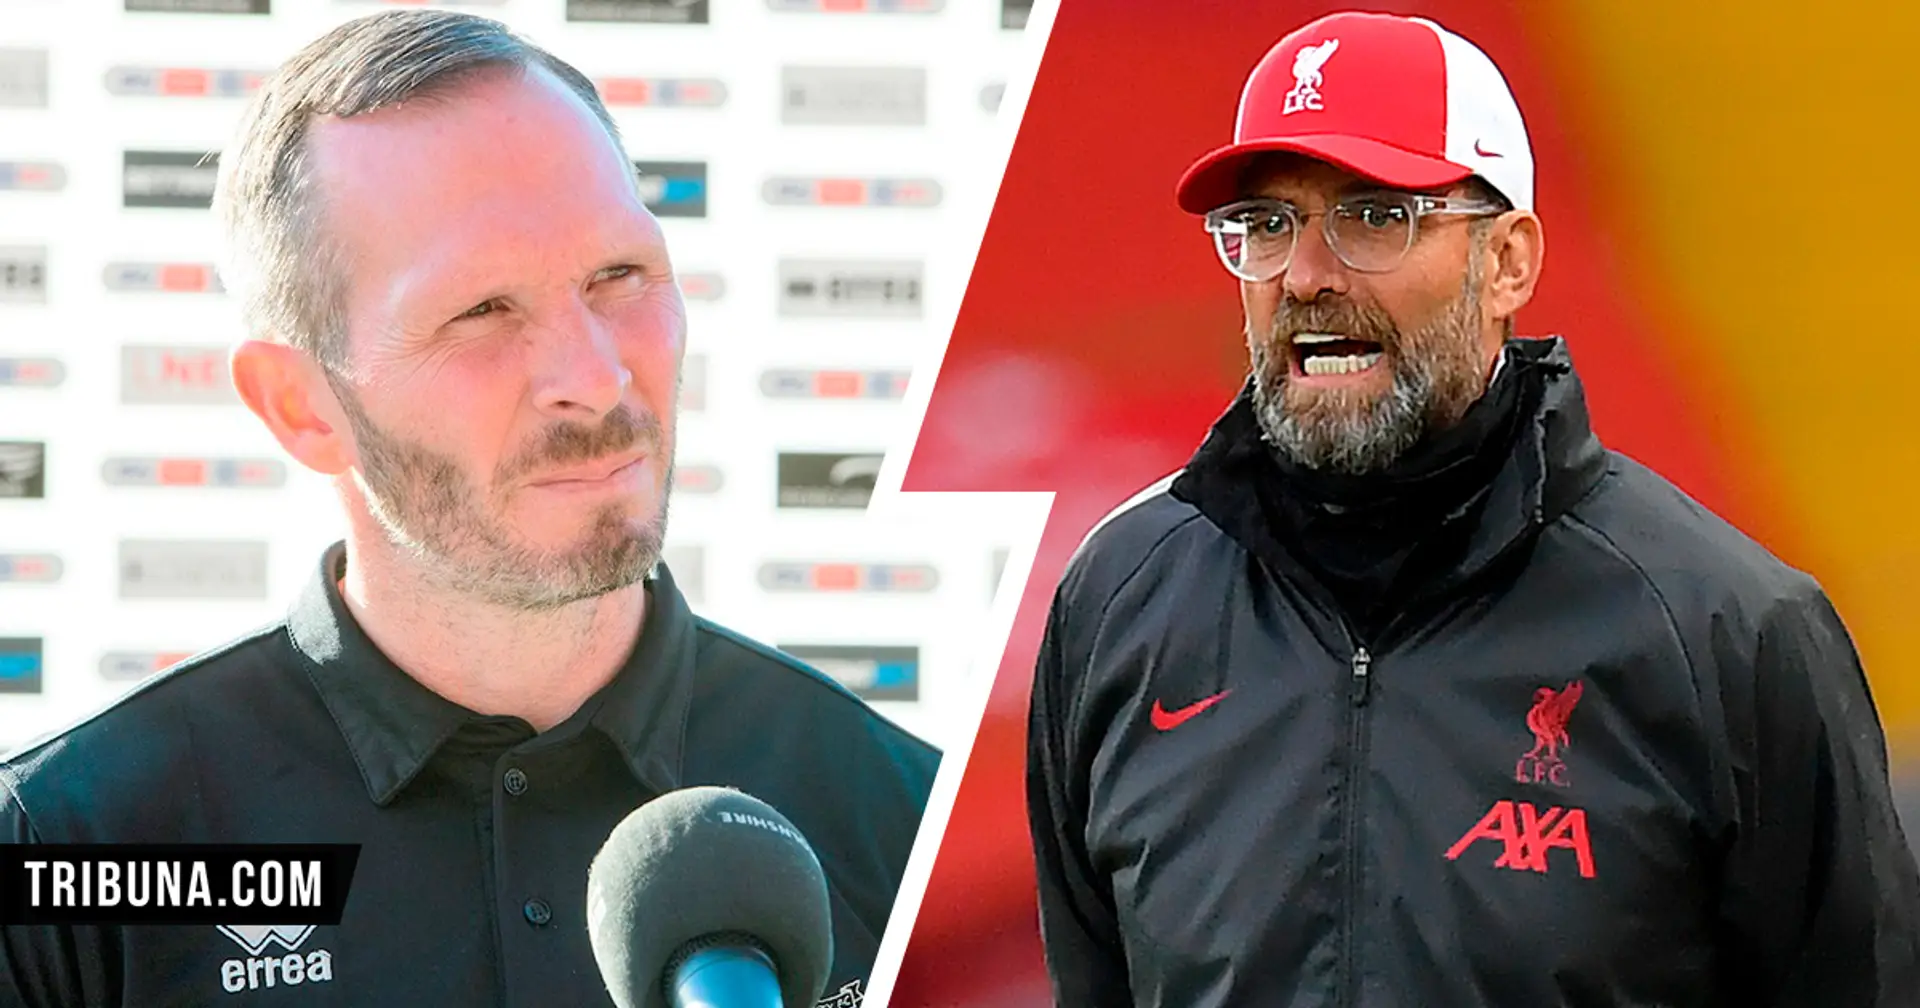 Lincoln boss Appleton: 'People talk about Pep and Klopp and Mourinho. In my eyes, we’ll be coming up against the best manager in the world'